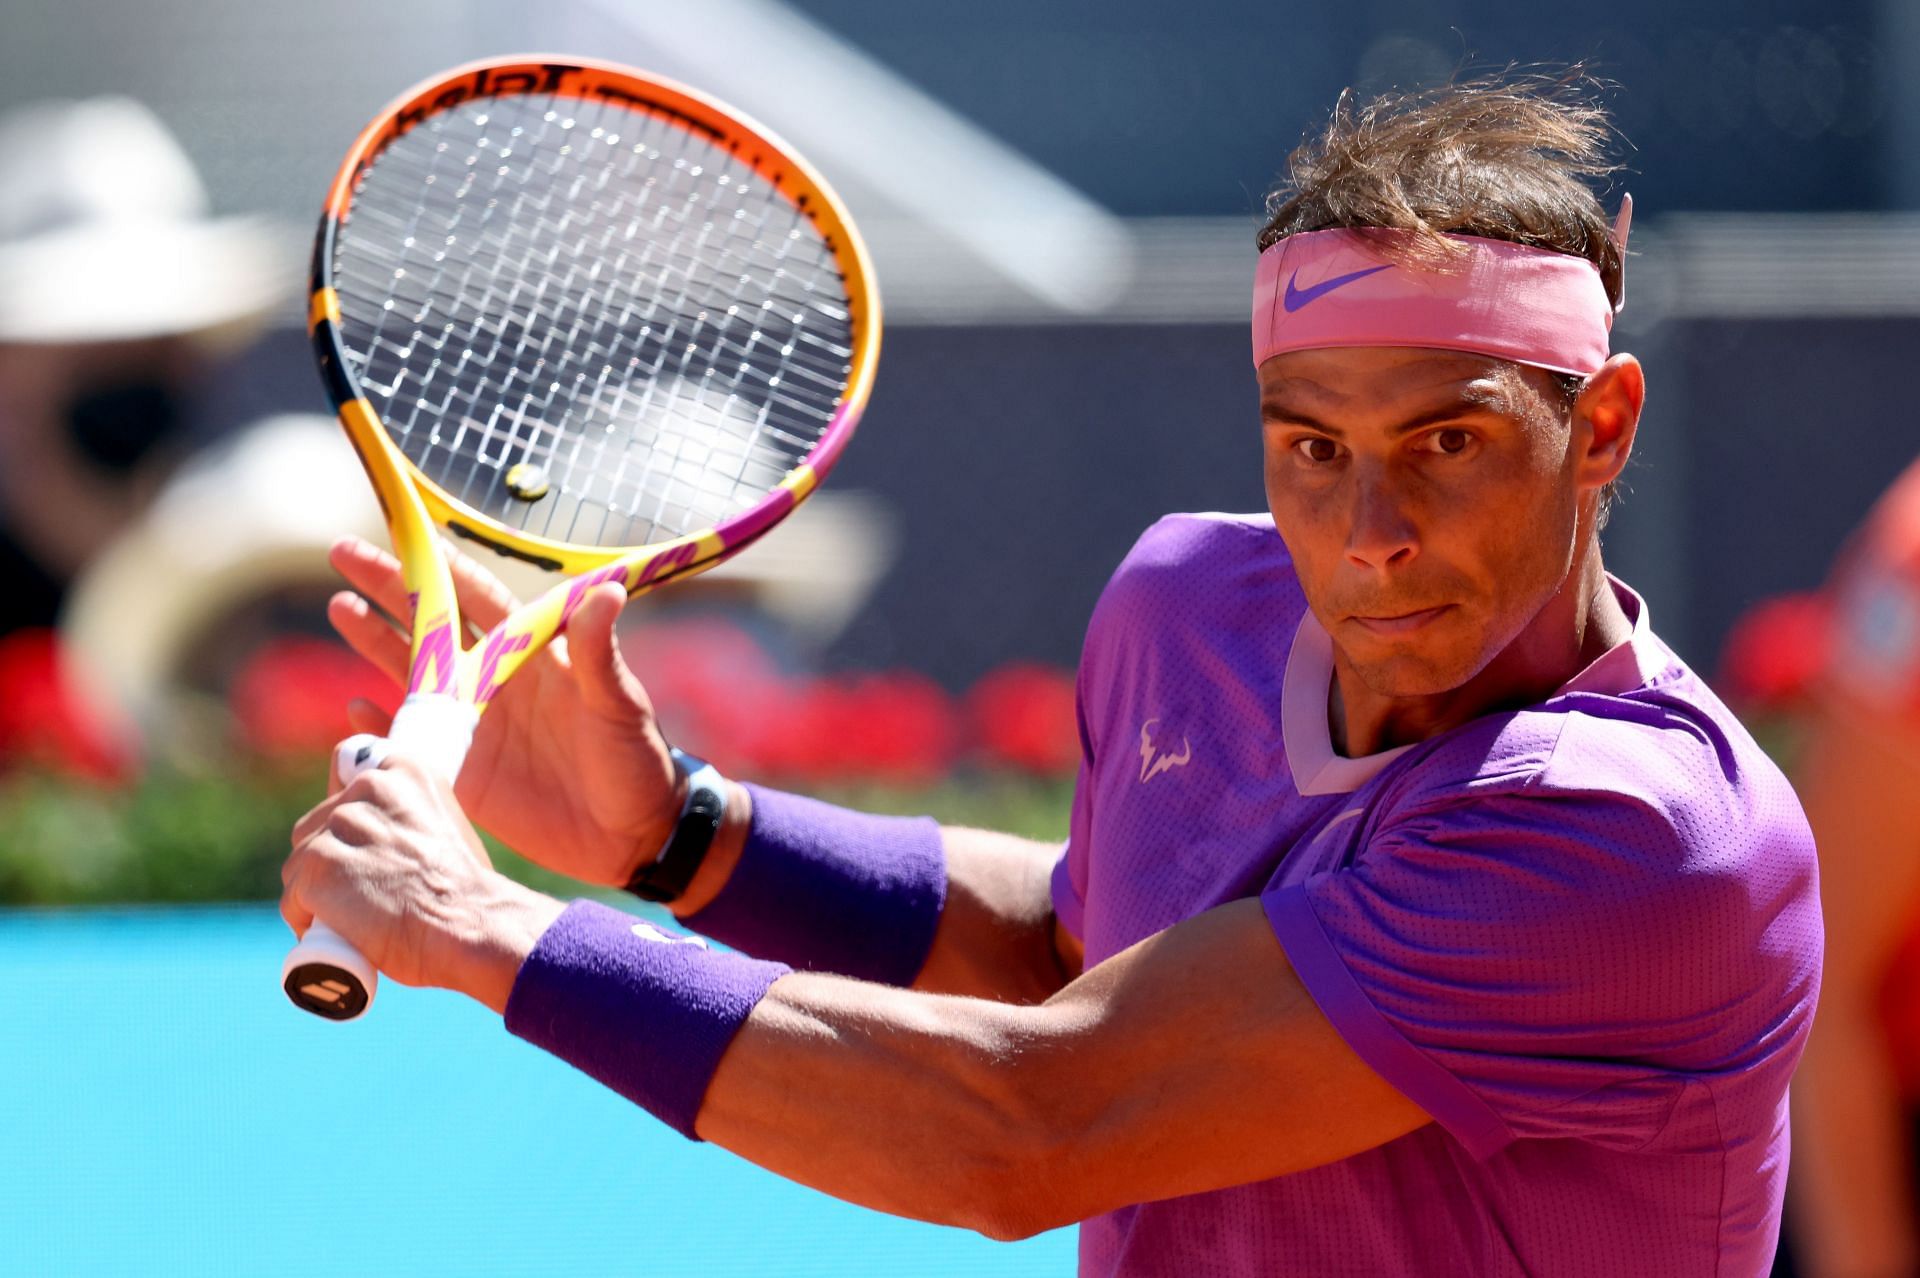 Madrid Open 2022 Where to watch, TV schedule, live streaming details and more